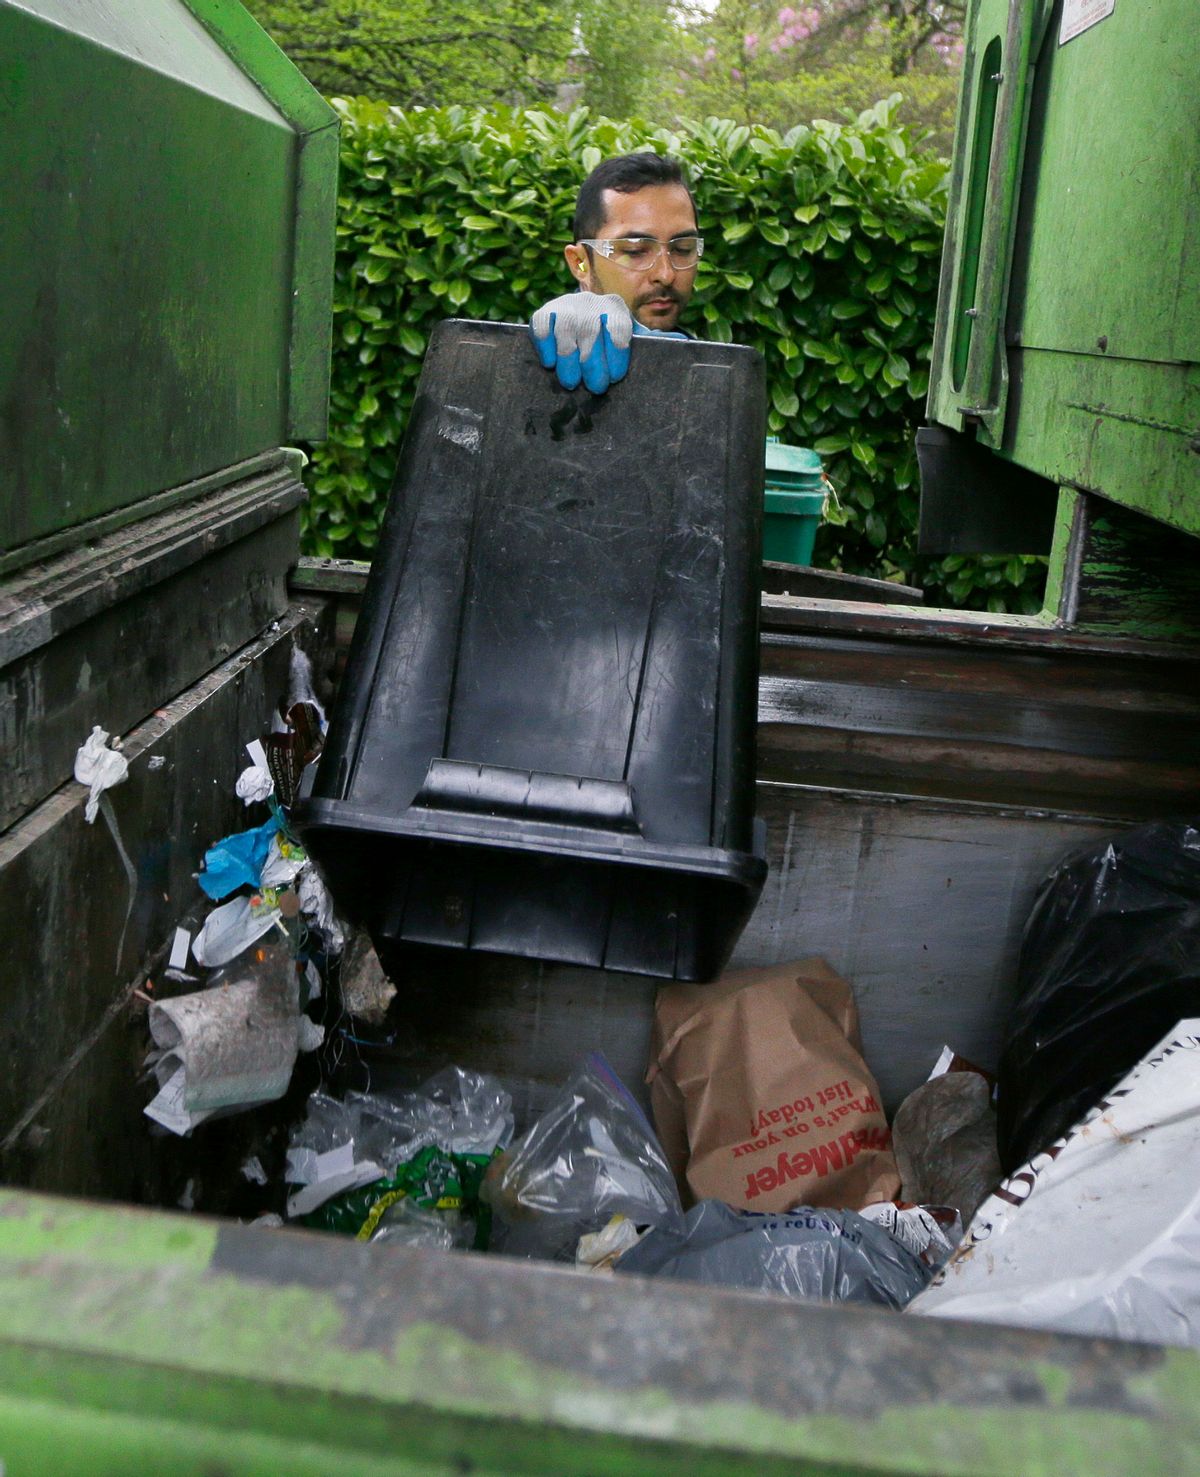 David Morales, a garbage driver with Recology, dumps a garbage container for Seattle Public Utilities, Friday, April 15, 2016, in Seattle. A judge is scheduled to hear a challenge Friday, April 16, 2016, to a new Seattle law allowing garbage collectors to check people's trash to see whether they are disposing of recycling items and food waste incorrectly.  (AP Photo/Ted S. Warren) (AP)